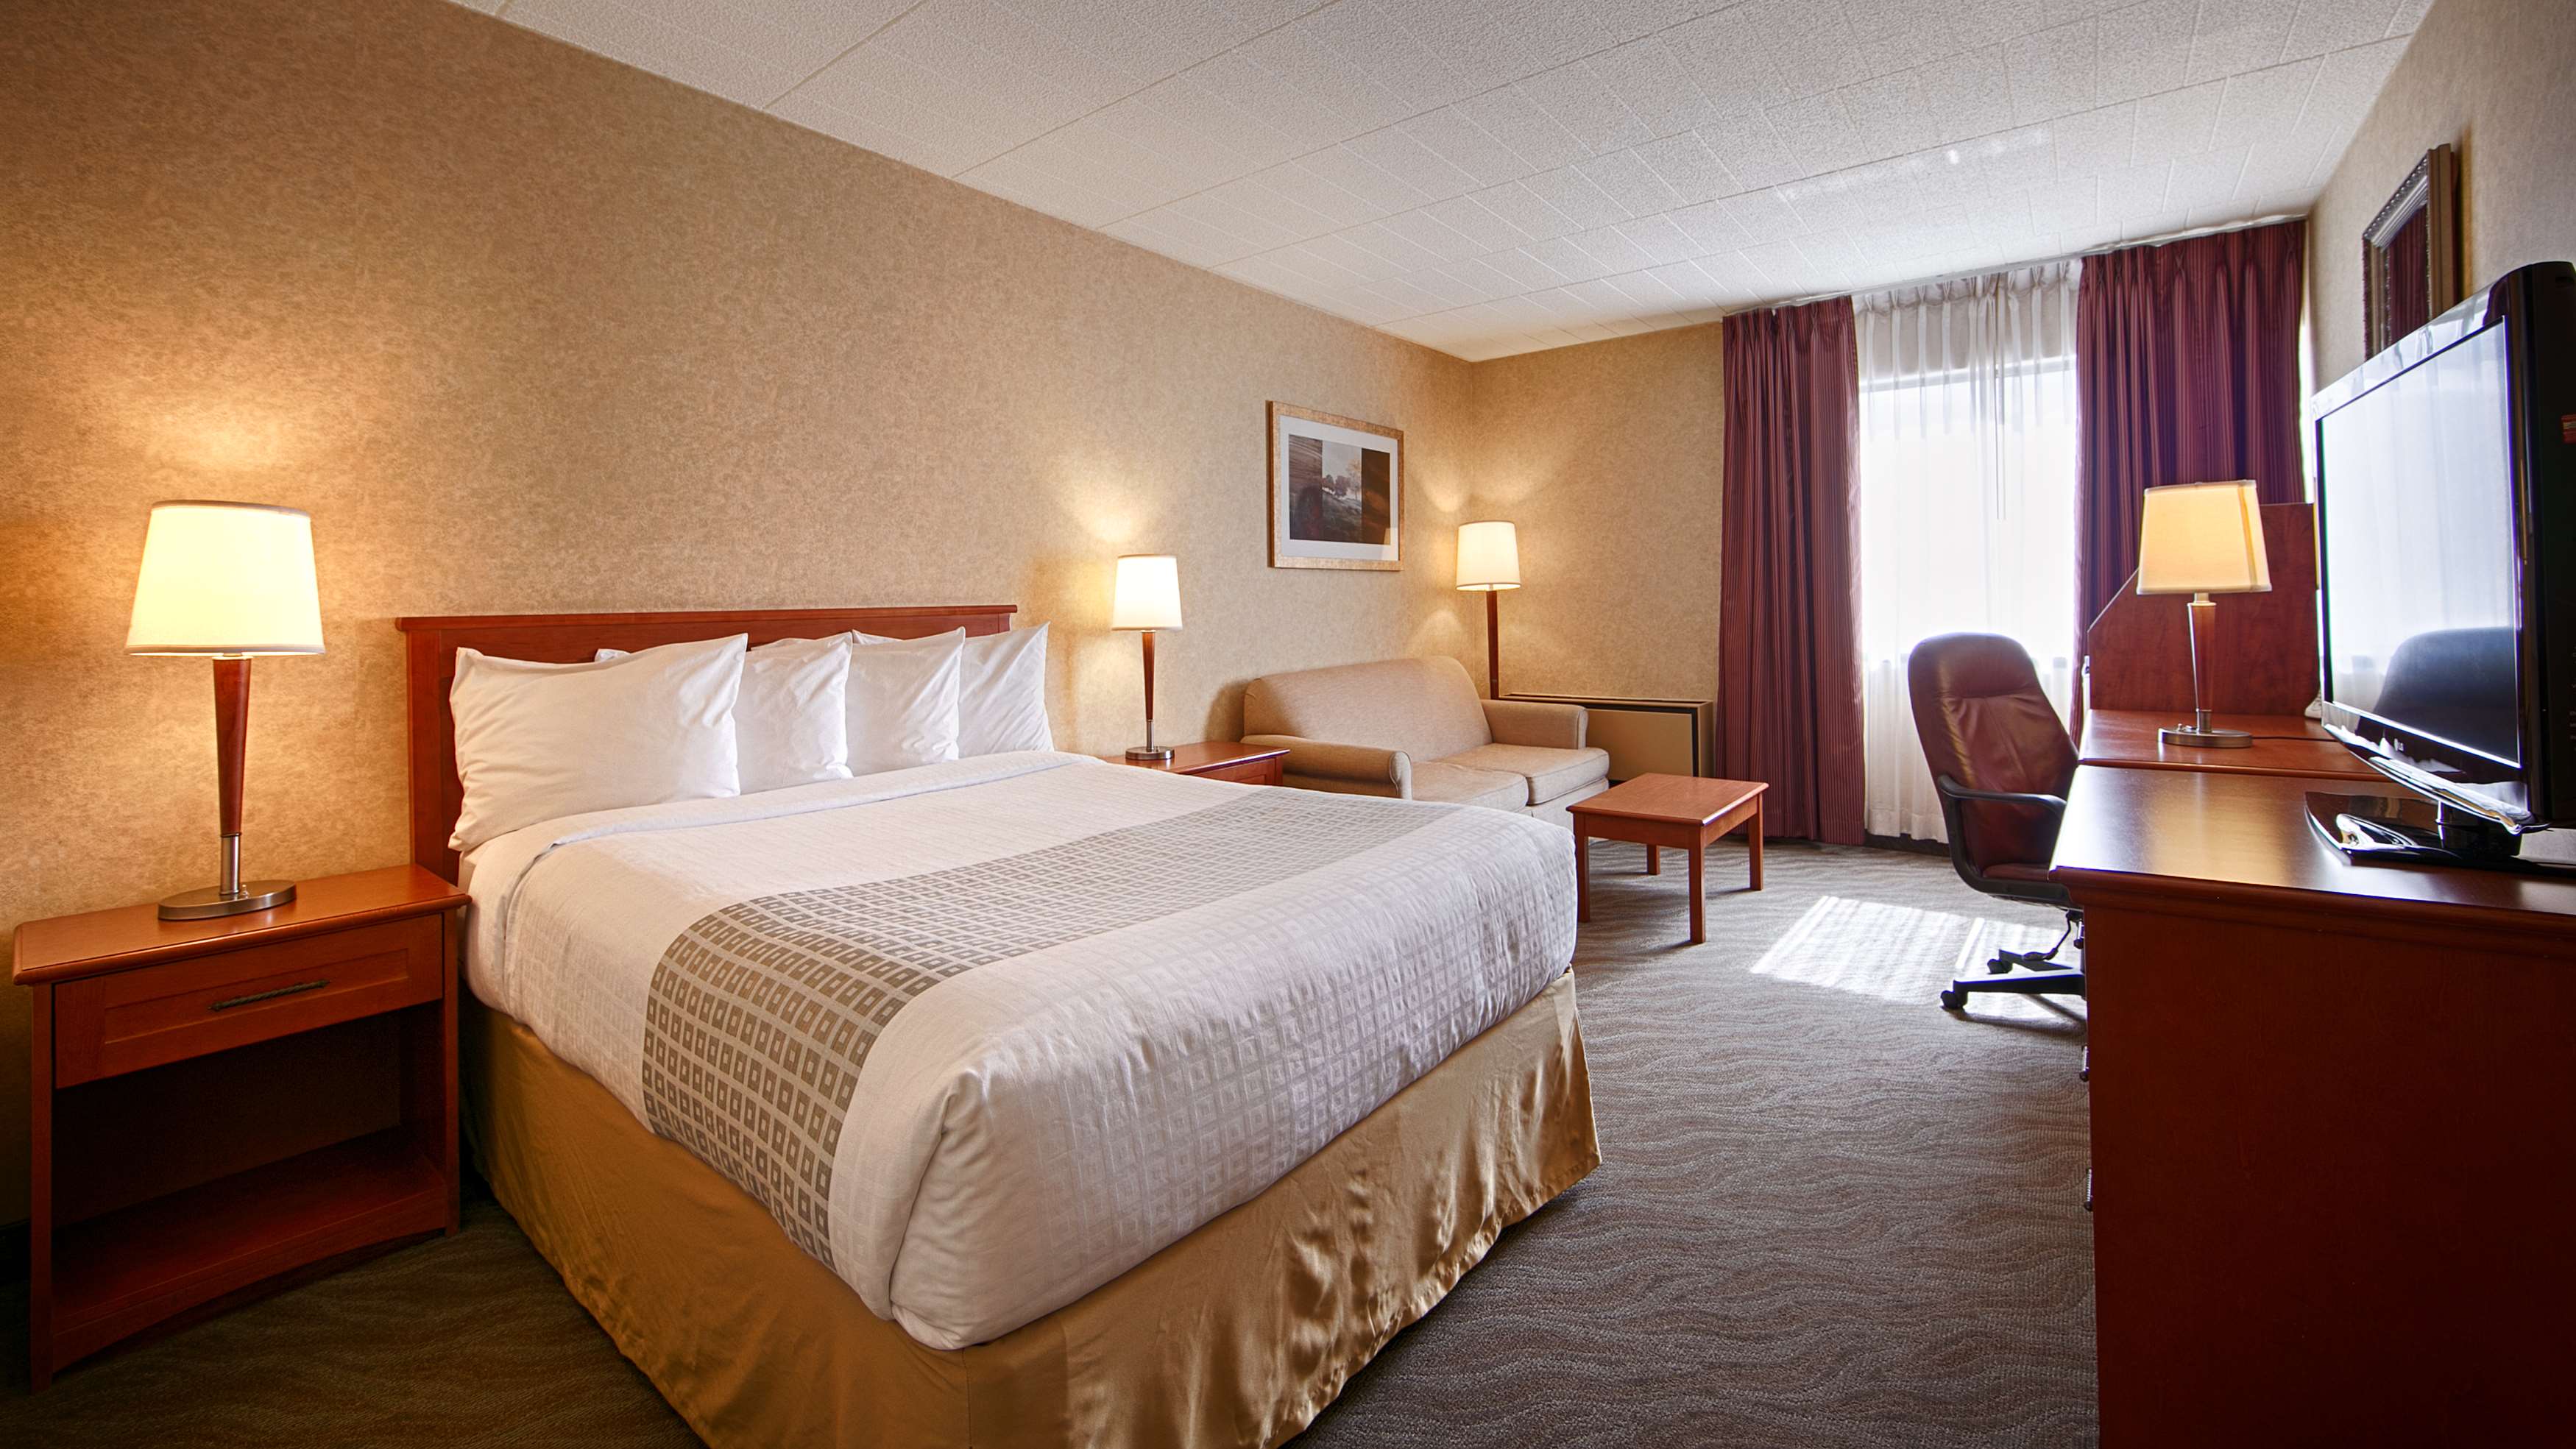 Queen Guest Room Best Western North Bay Hotel & Conference Centre North Bay (705)474-5800